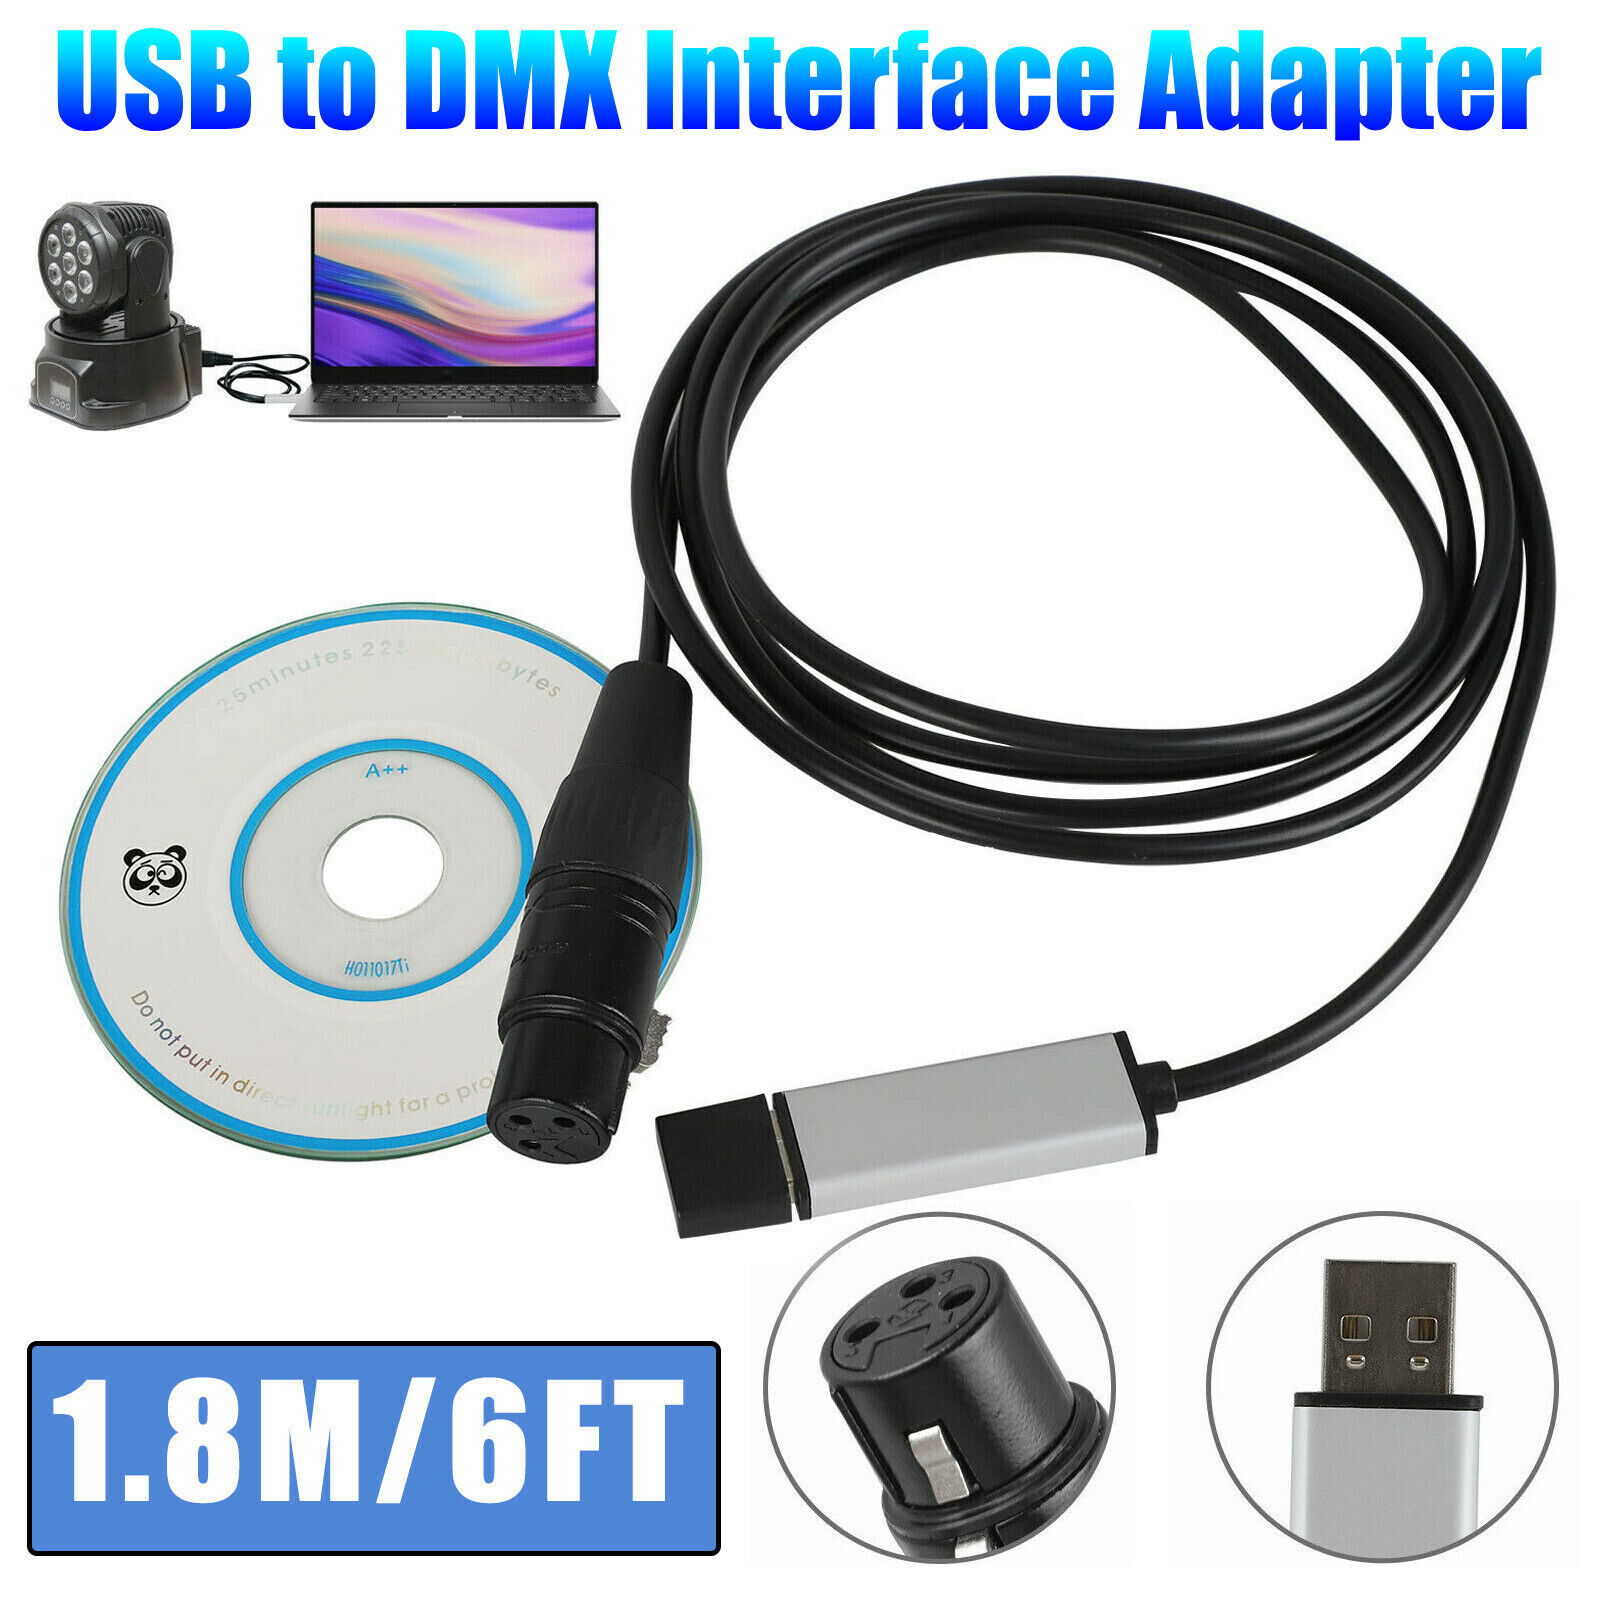 Primary image for USB to DMX Interface Adapter DMX512 Controller Cable Stage Light for PC Computer